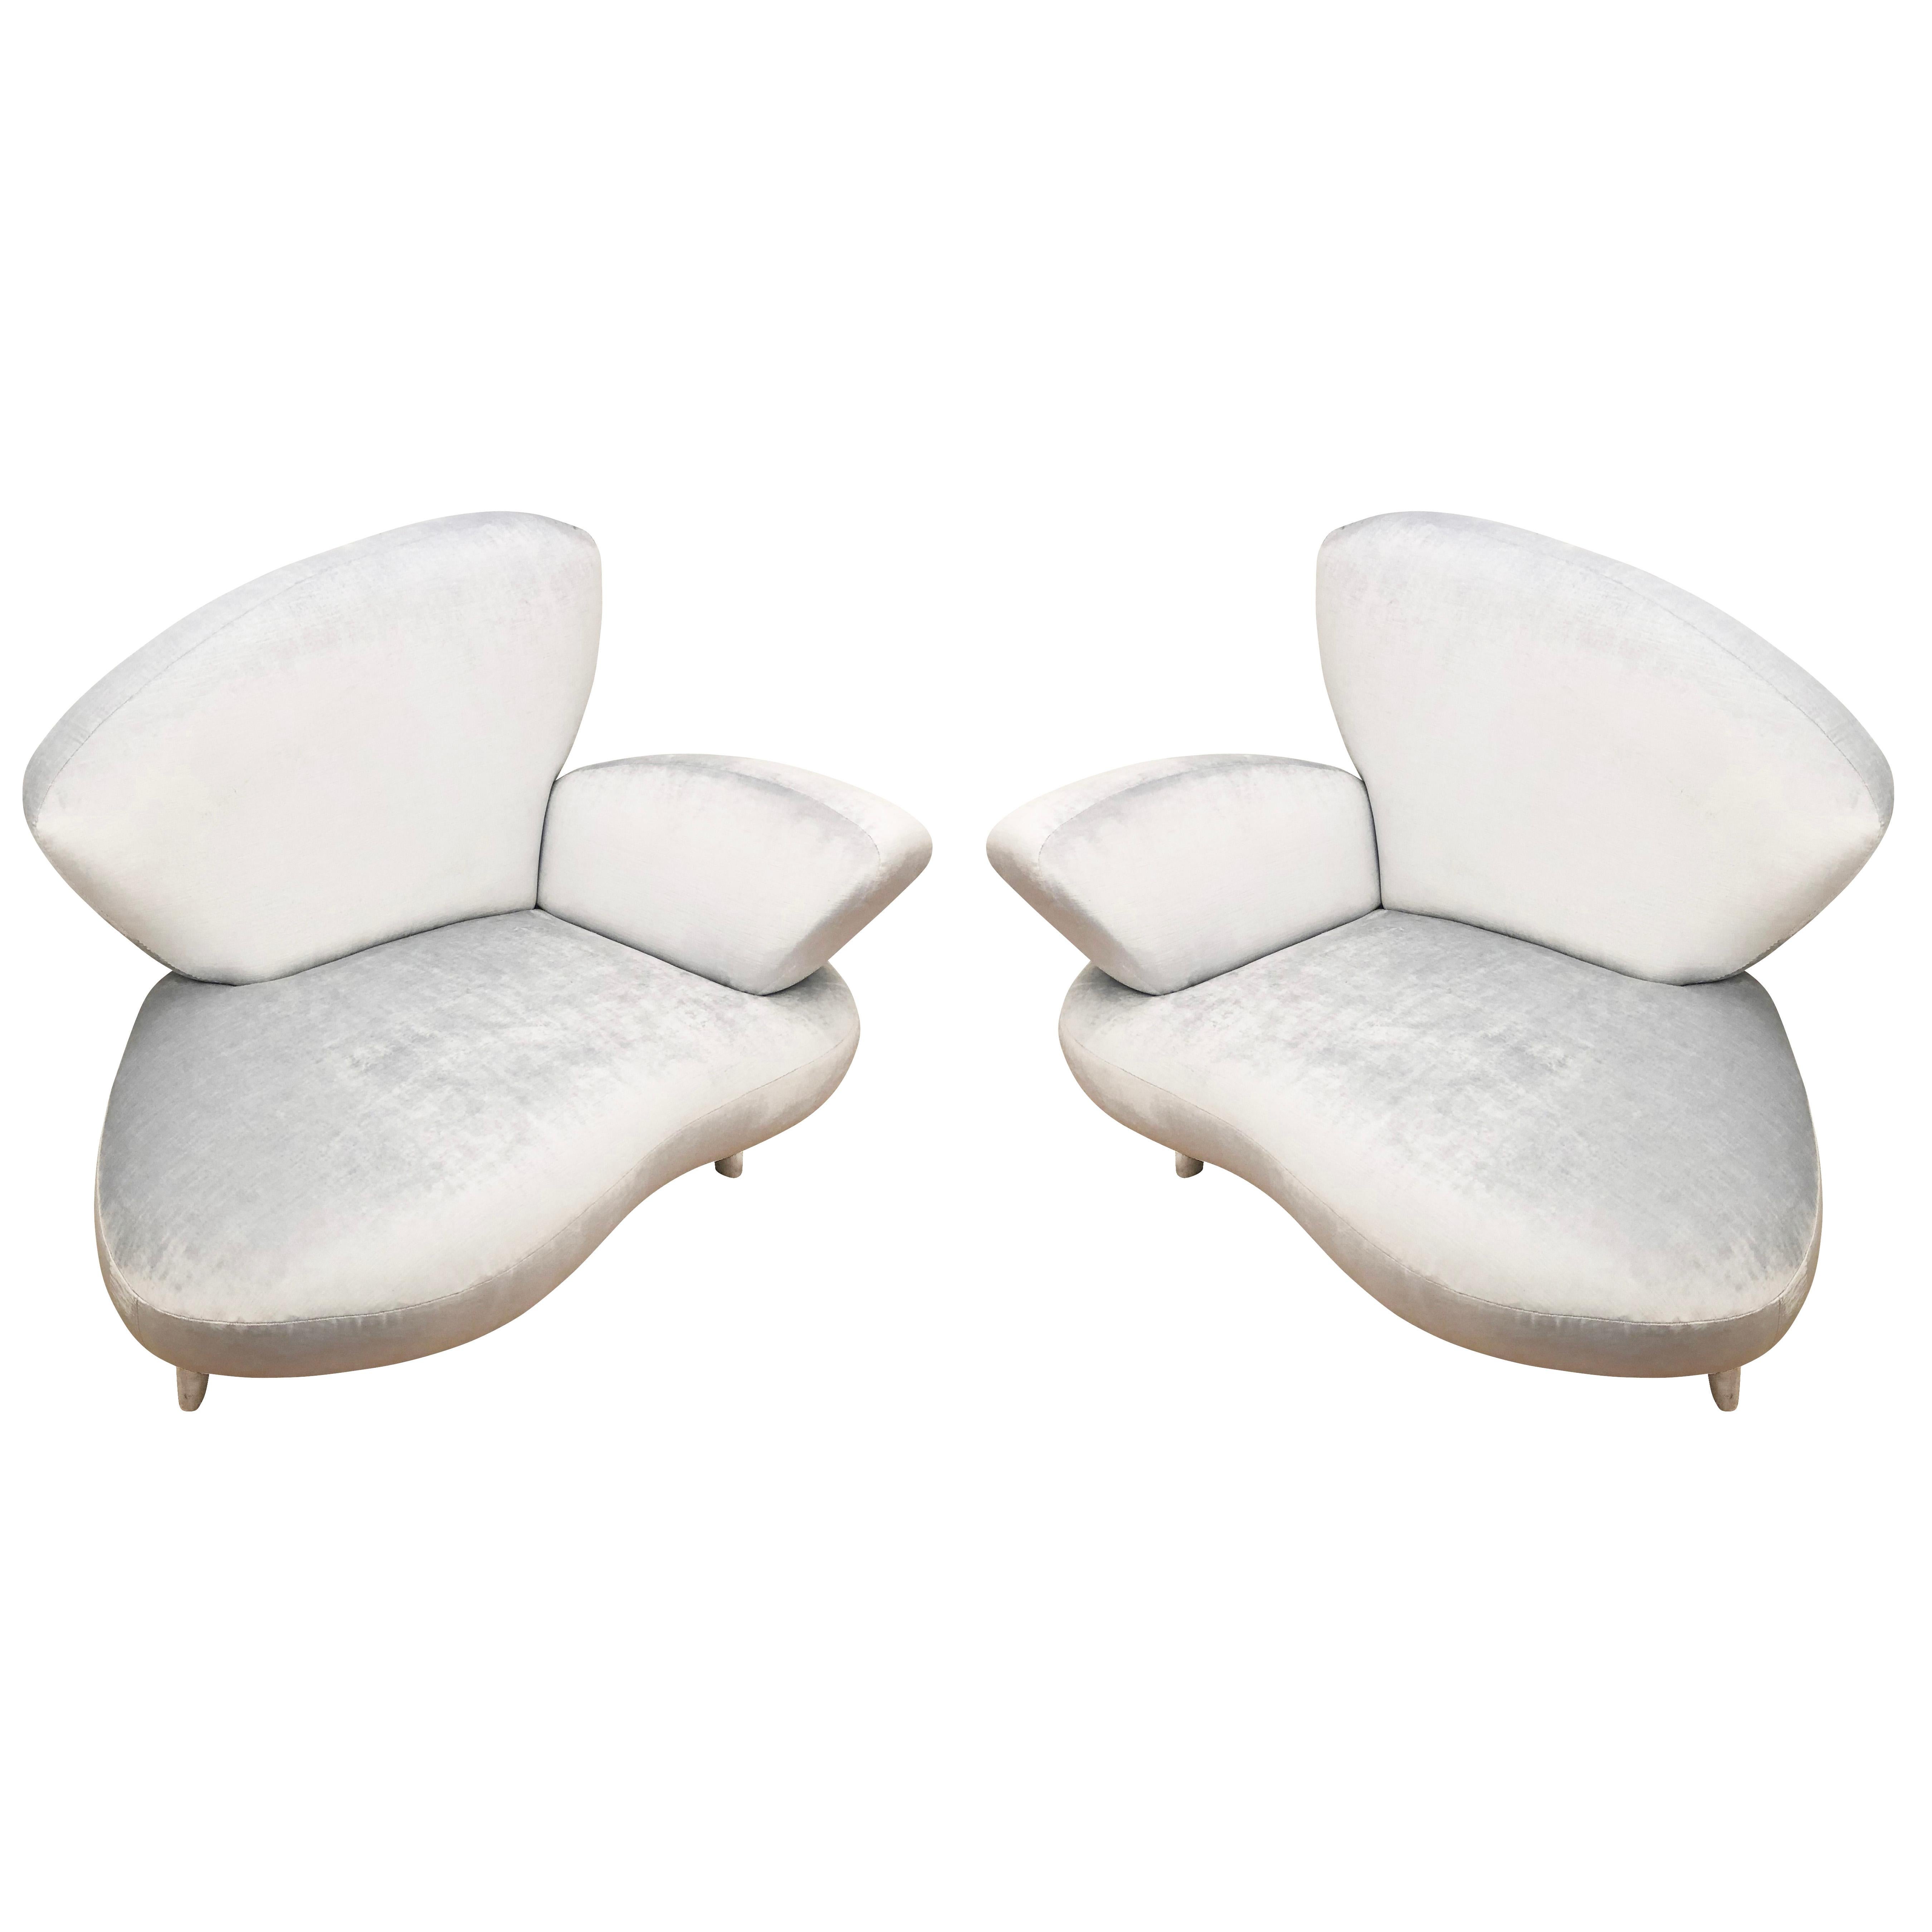 Pair of Lounge Chairs by Poltromec Italia